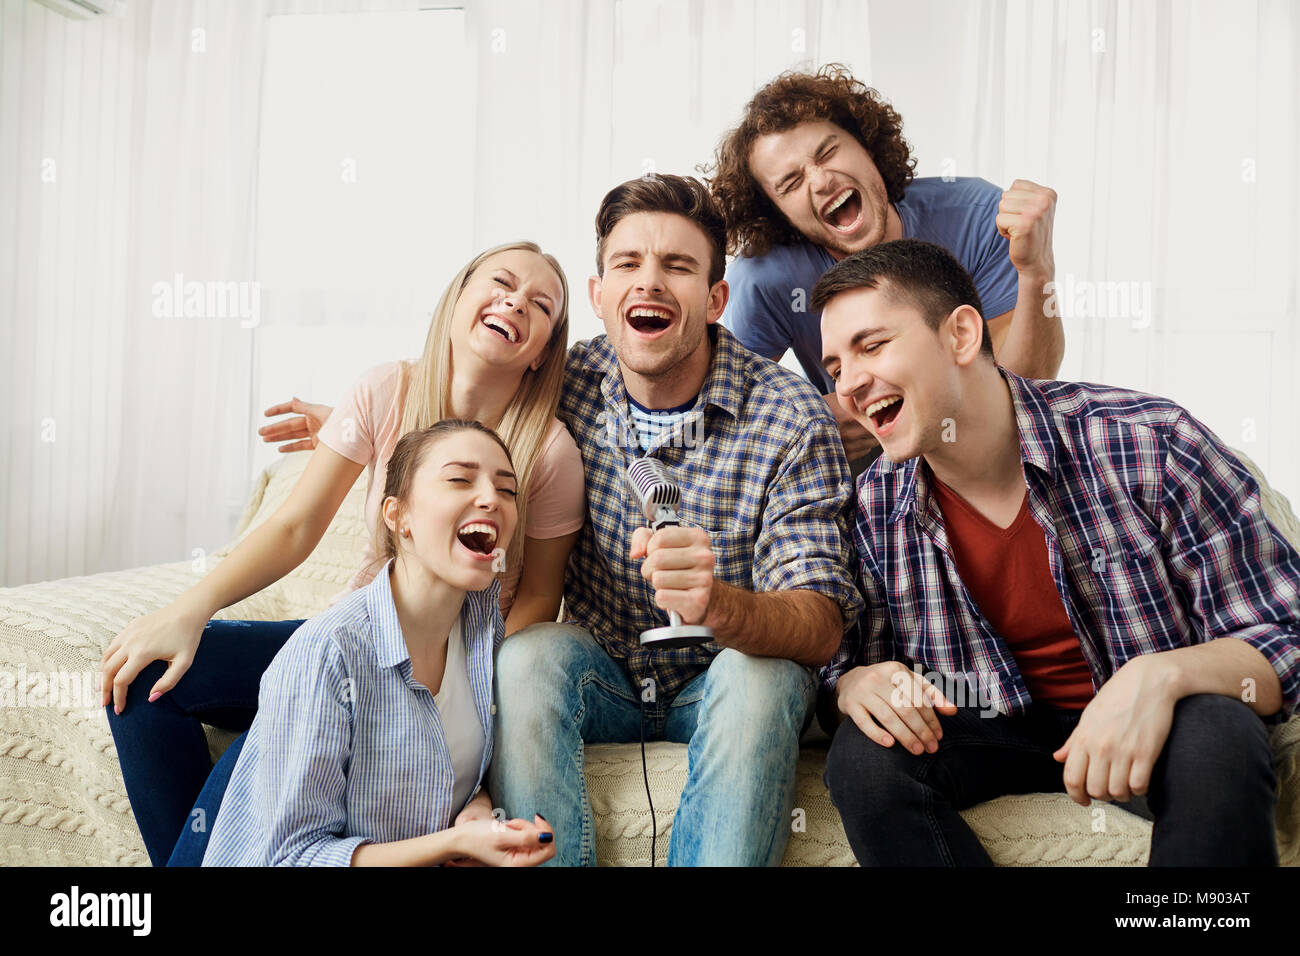 A group of friends with a microphone are singing fun songs indoo Stock Photo